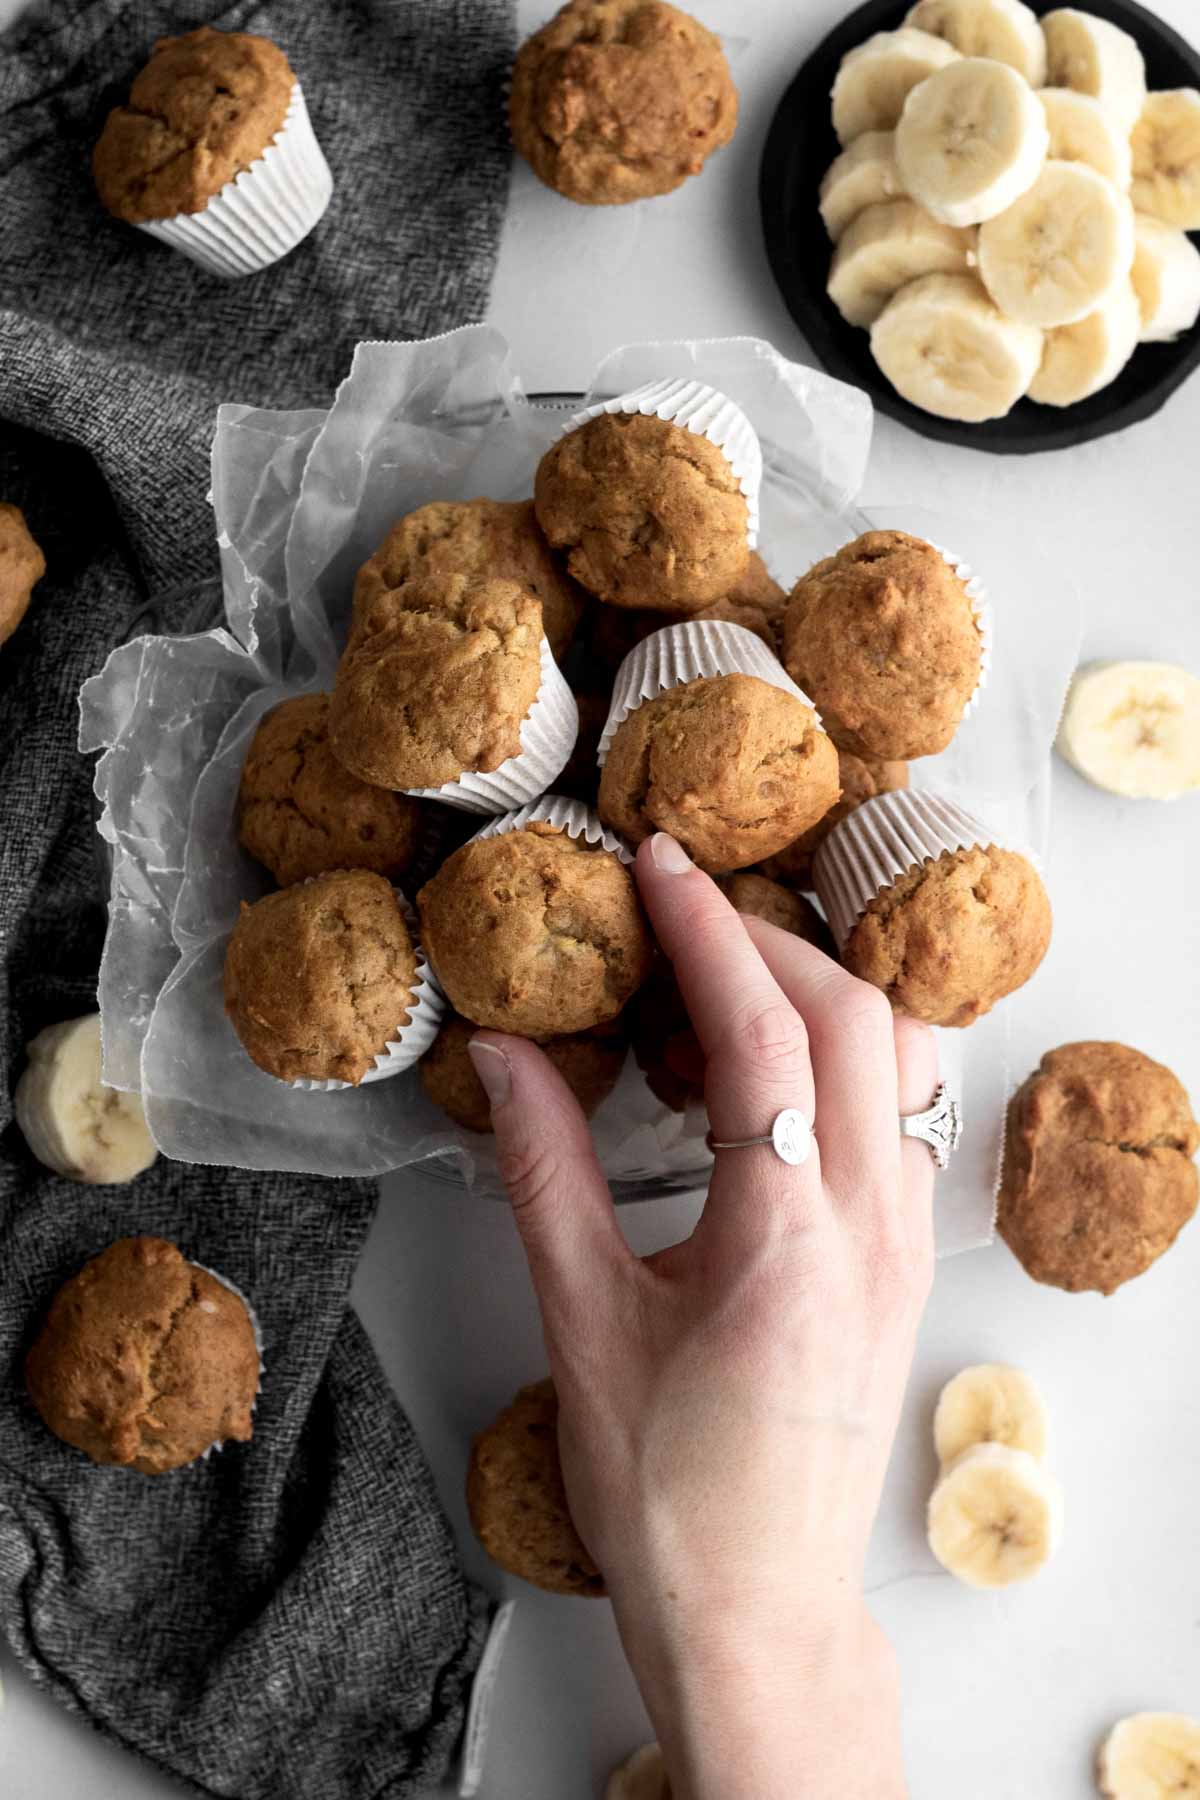 A hand grabs a banana muffin from the pile.